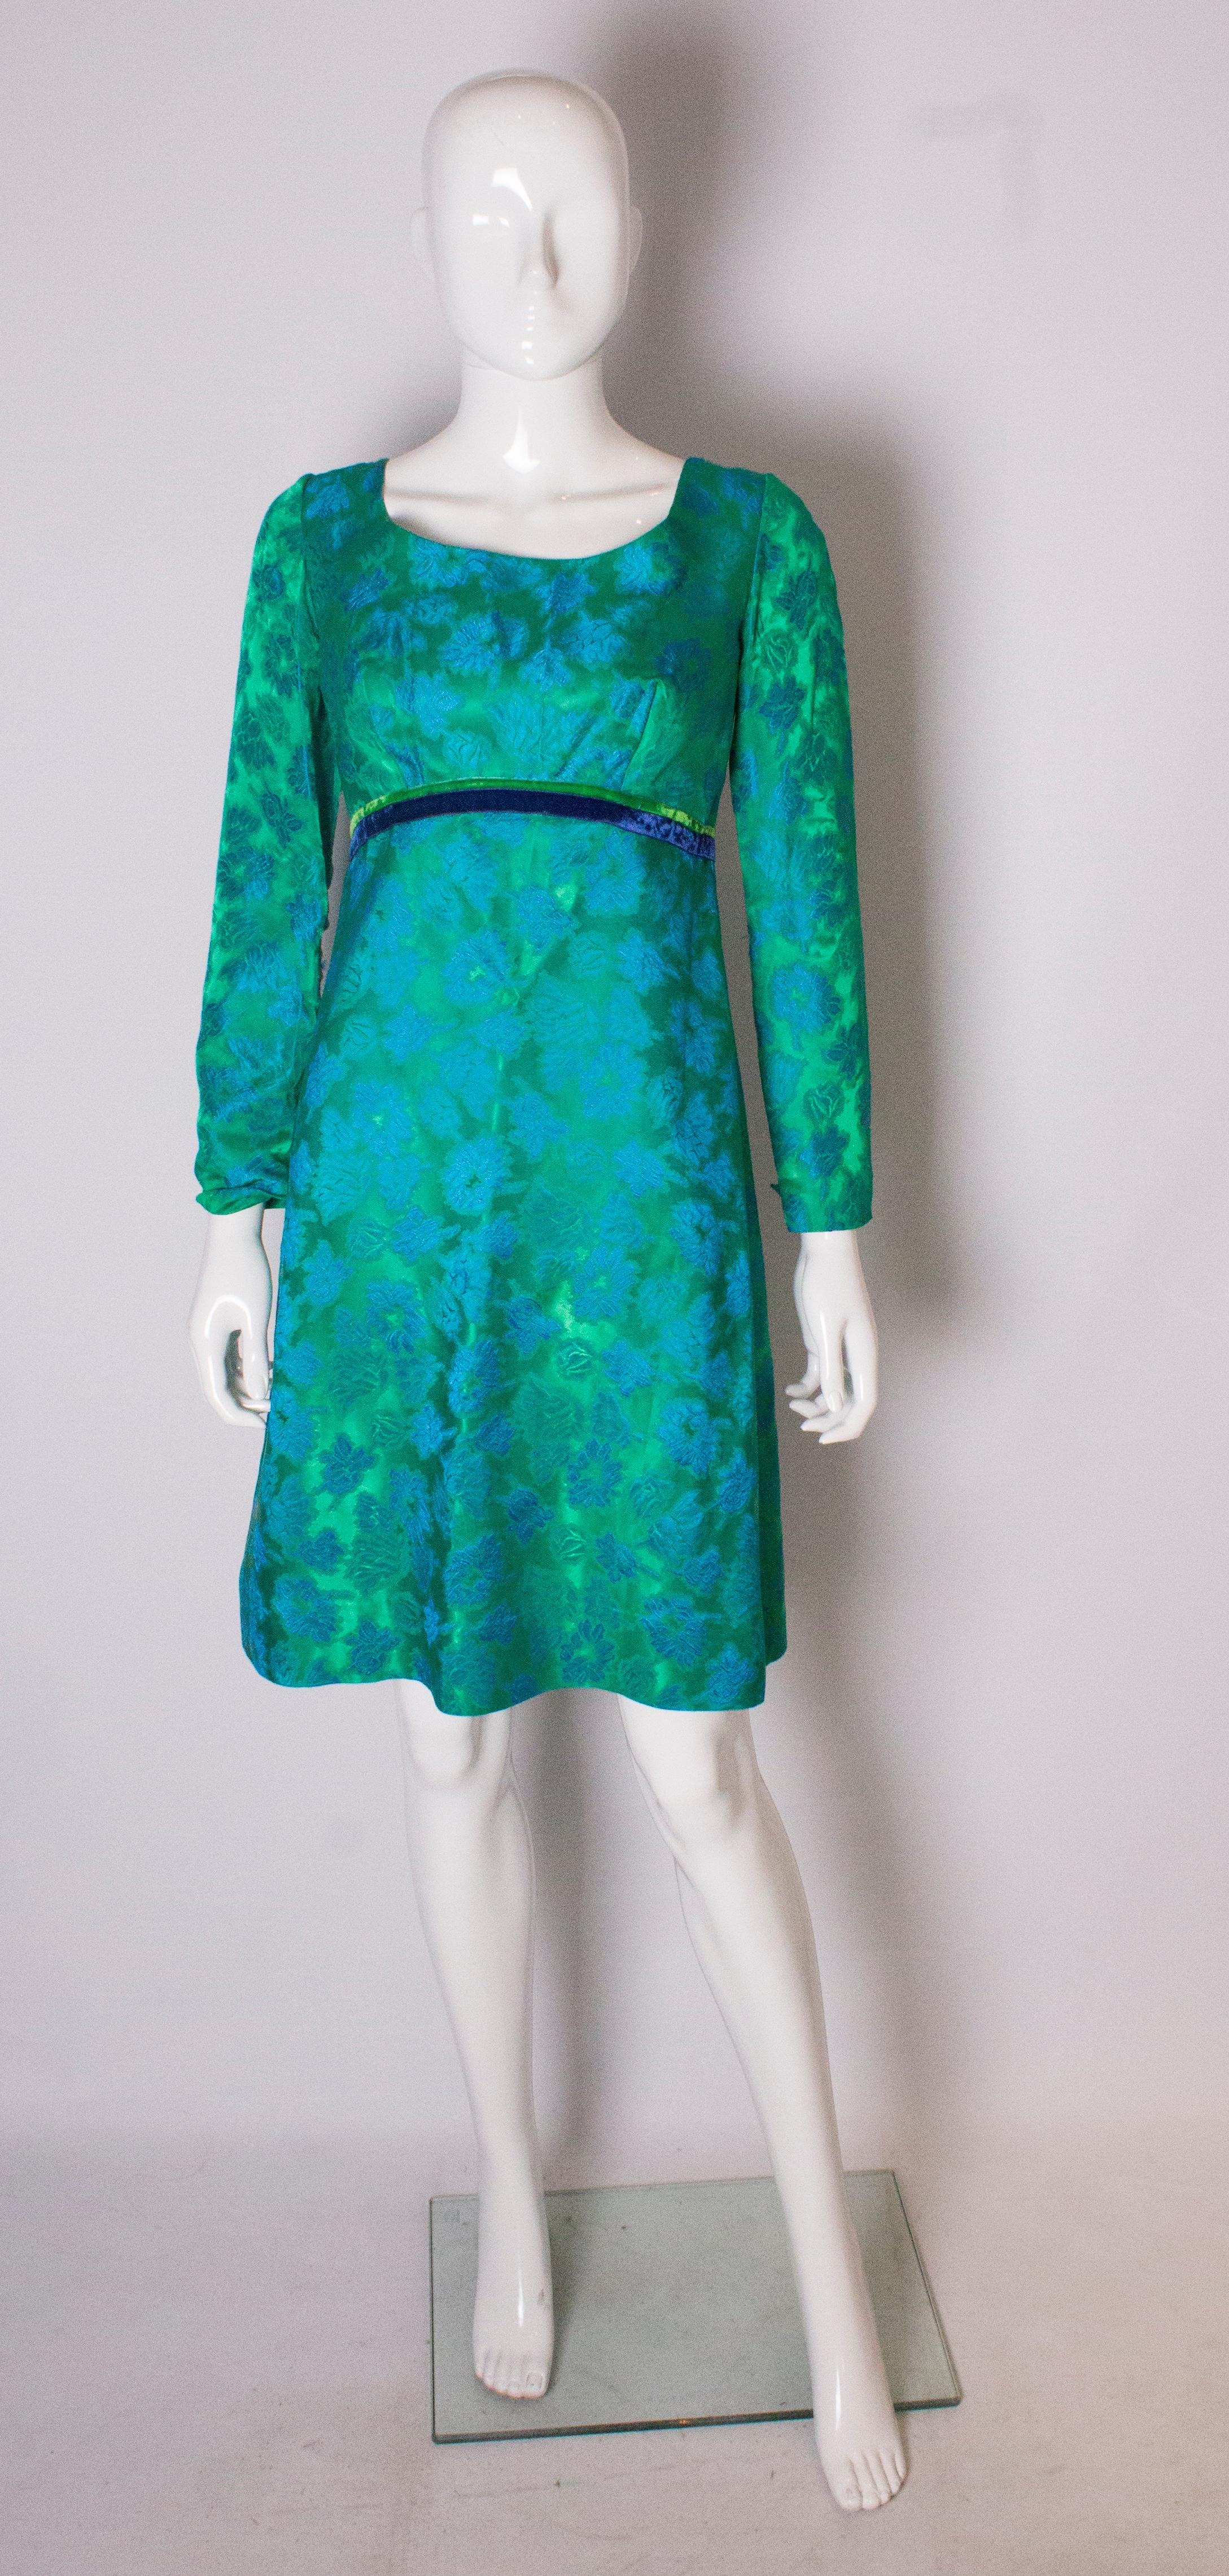 A chic cocktail dress from the 1960s. In a stunning green fabric with blue floral pattern, the dress has elbow length sleeves, blue and green ribbon detail under the bust , and a scoop neckline and backline. It is fully lined, with a 3''hem and